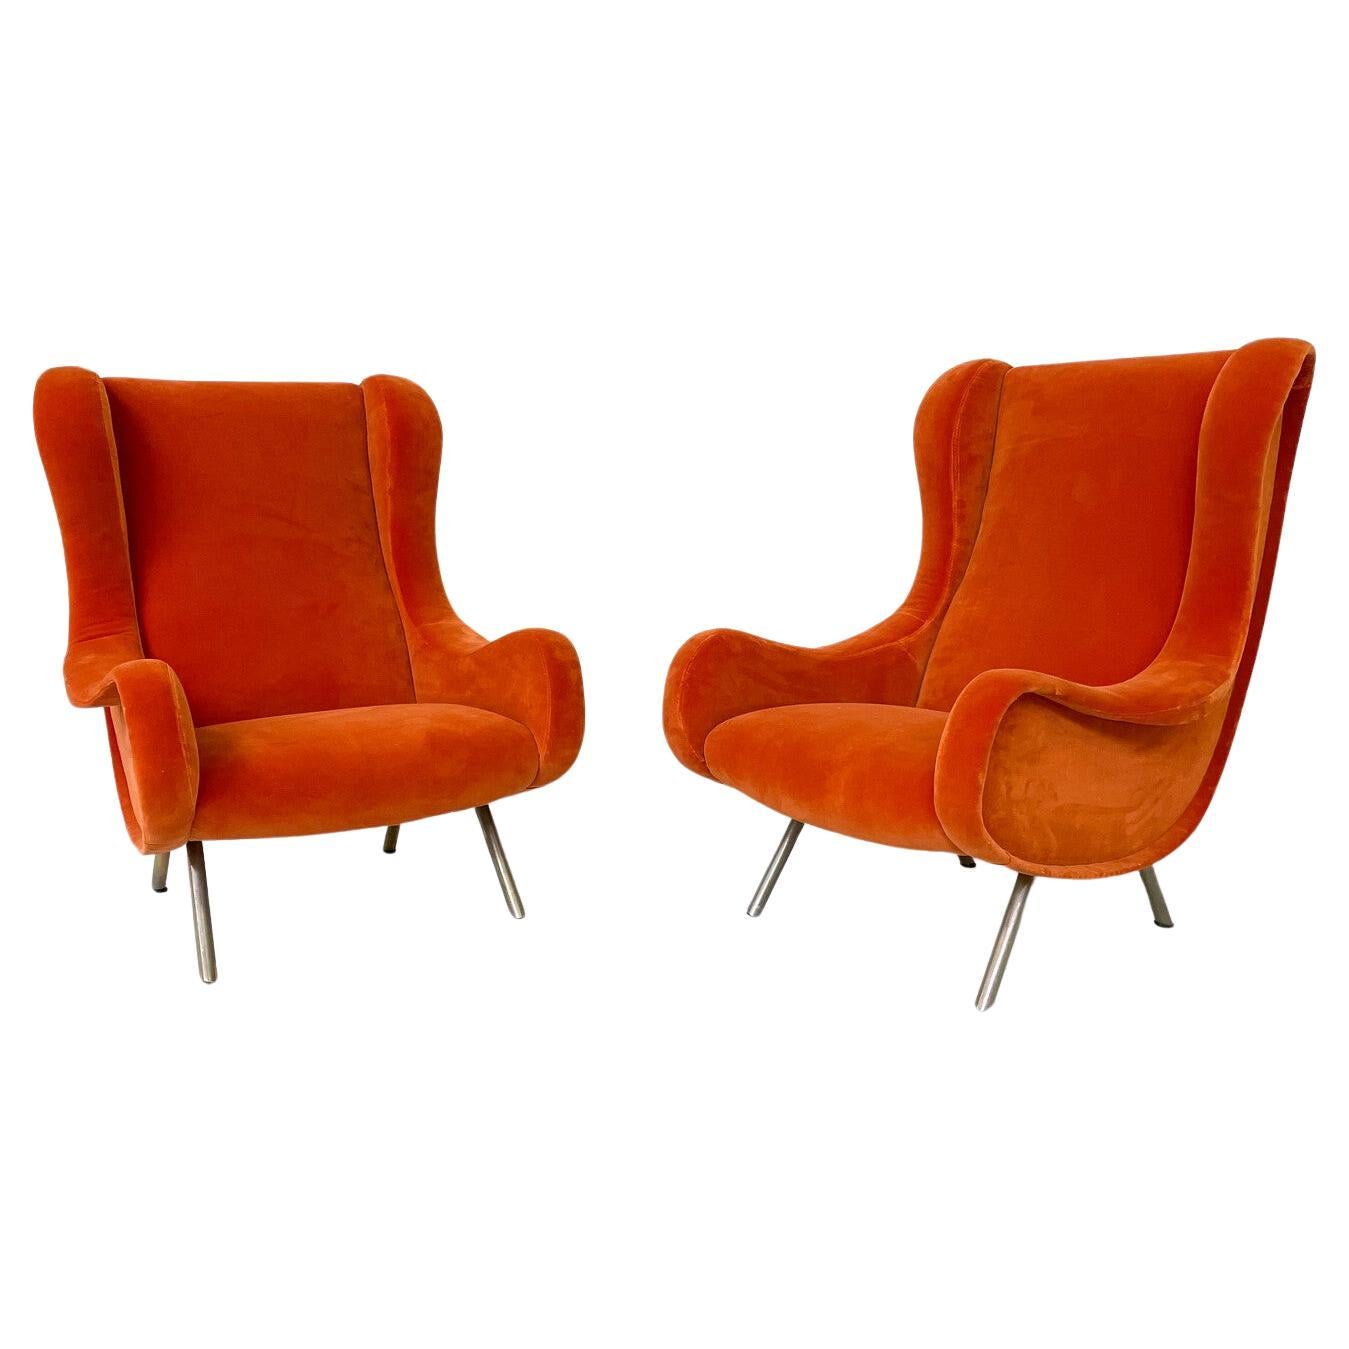 Mid-Century Modern Pair of Senior Armchairs by Marco Zanuso for Arlfex